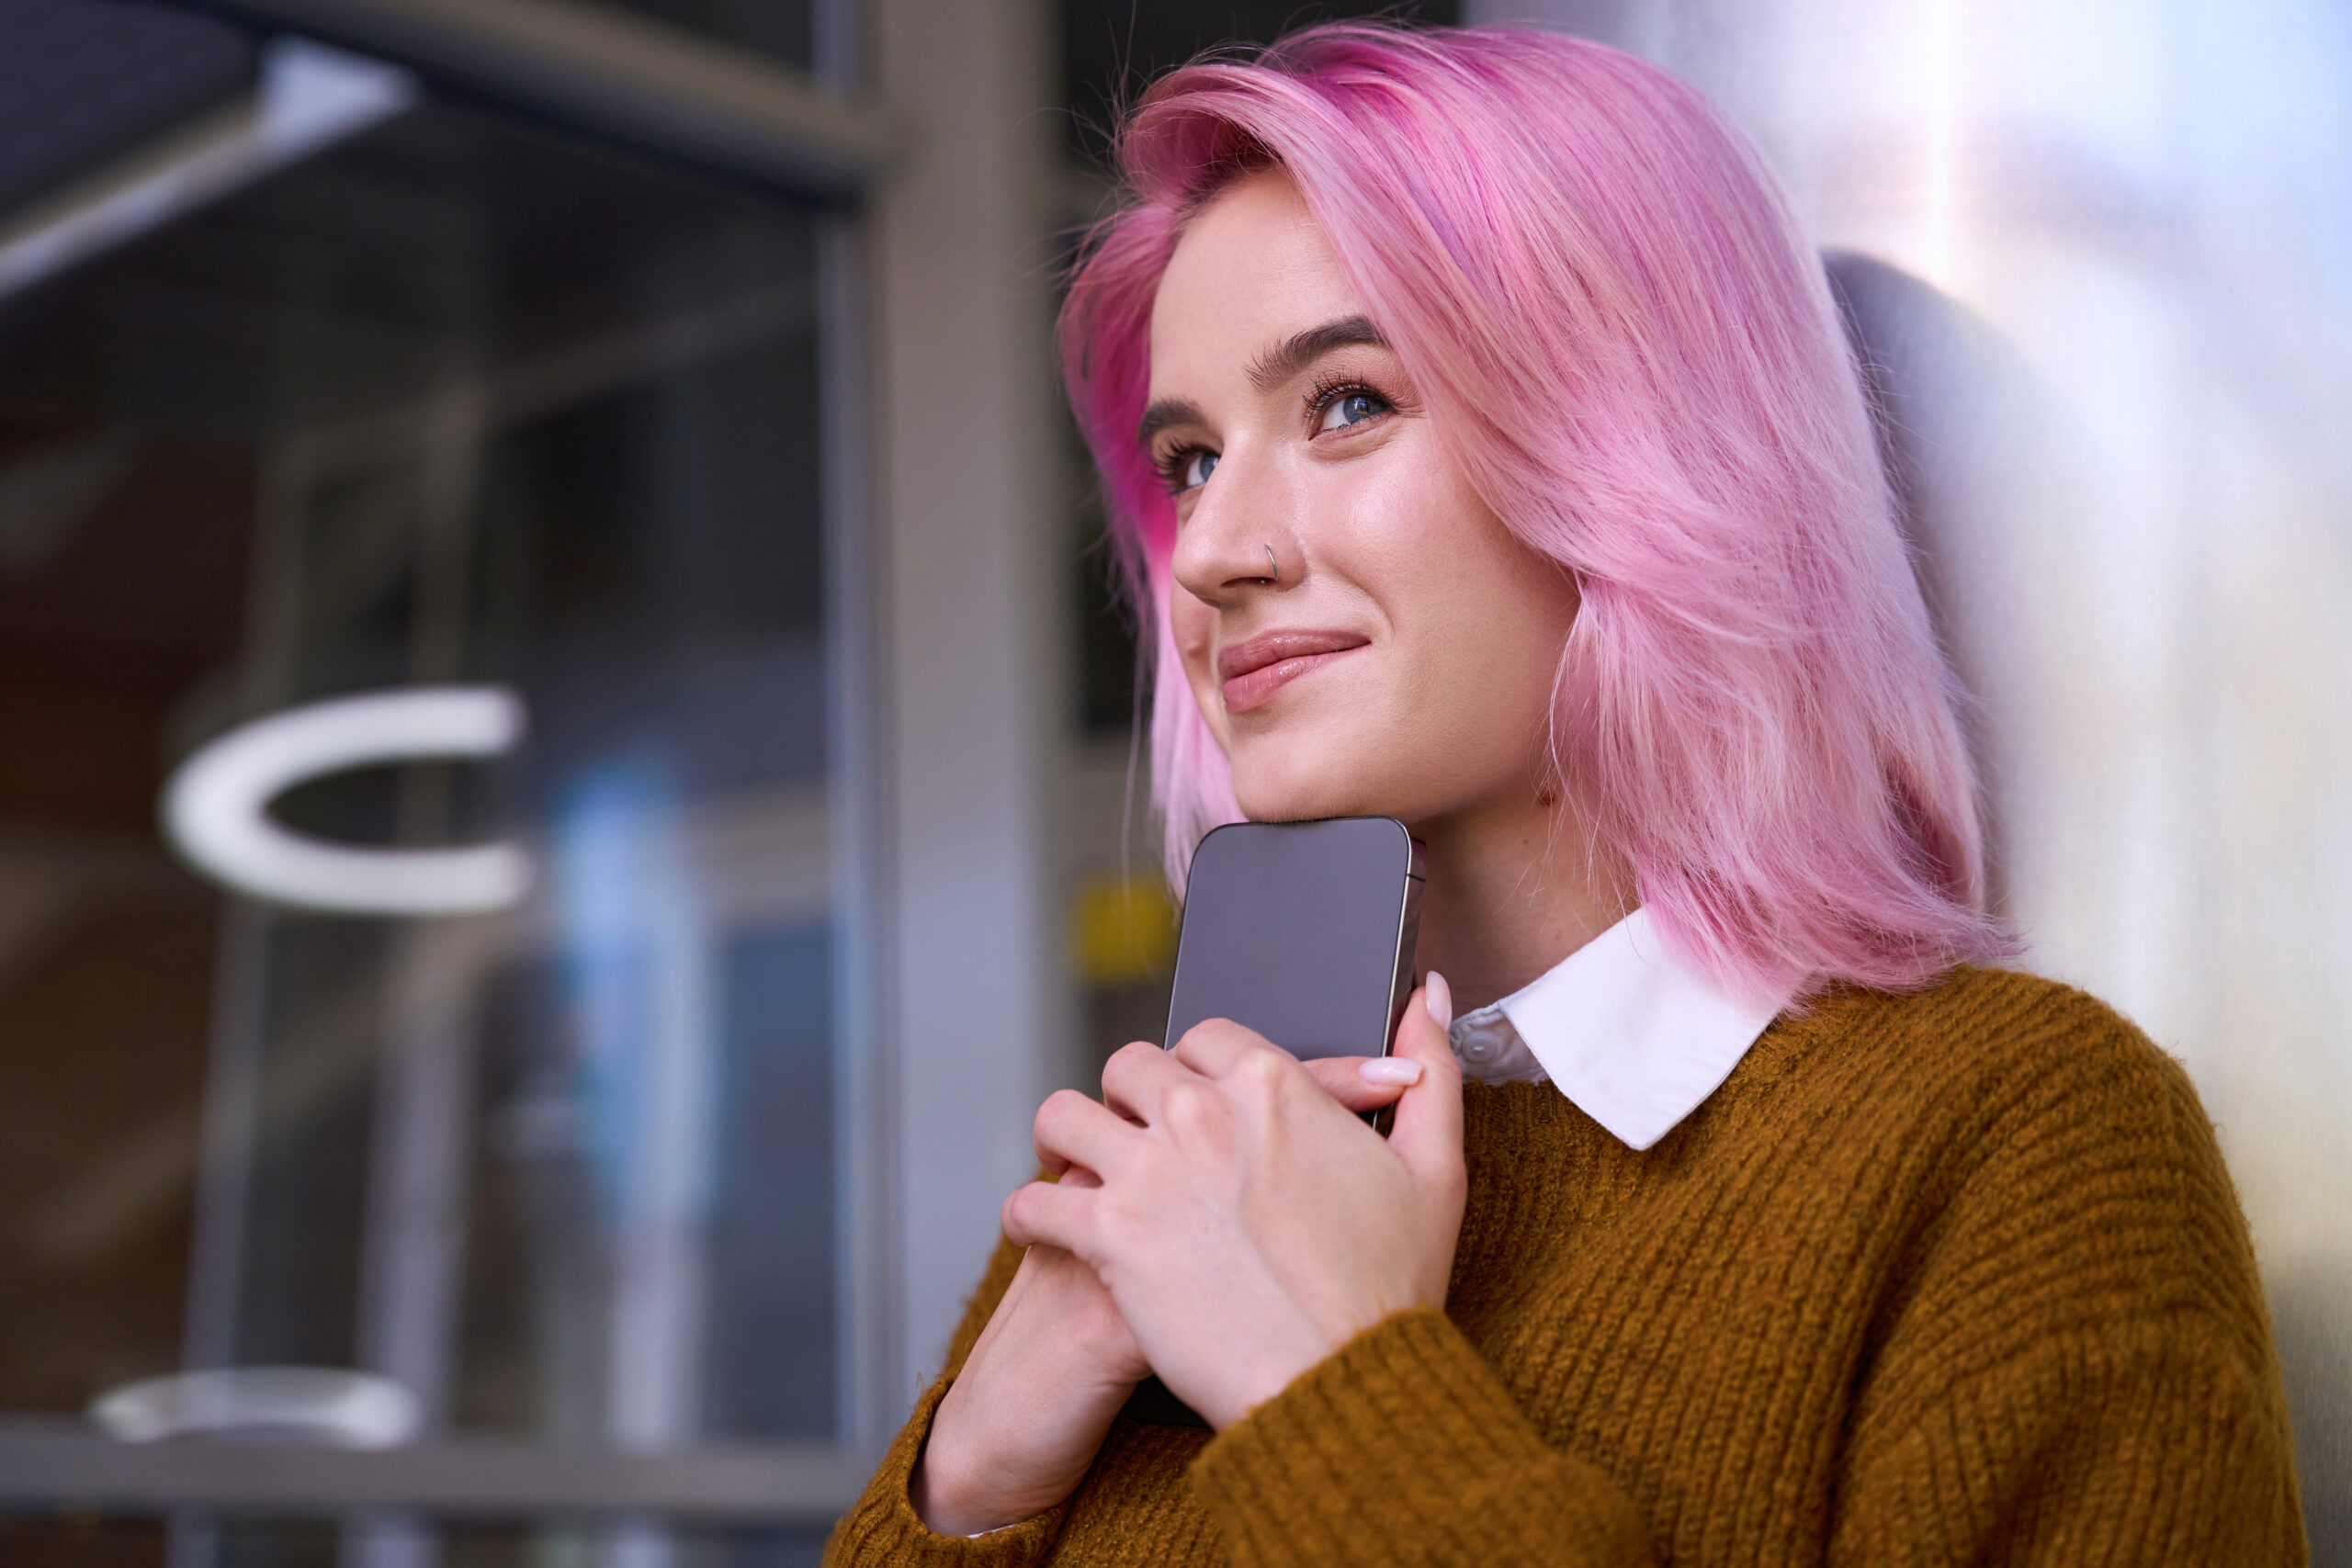 Smiling young lady with pink hair holding her smart phone close to her